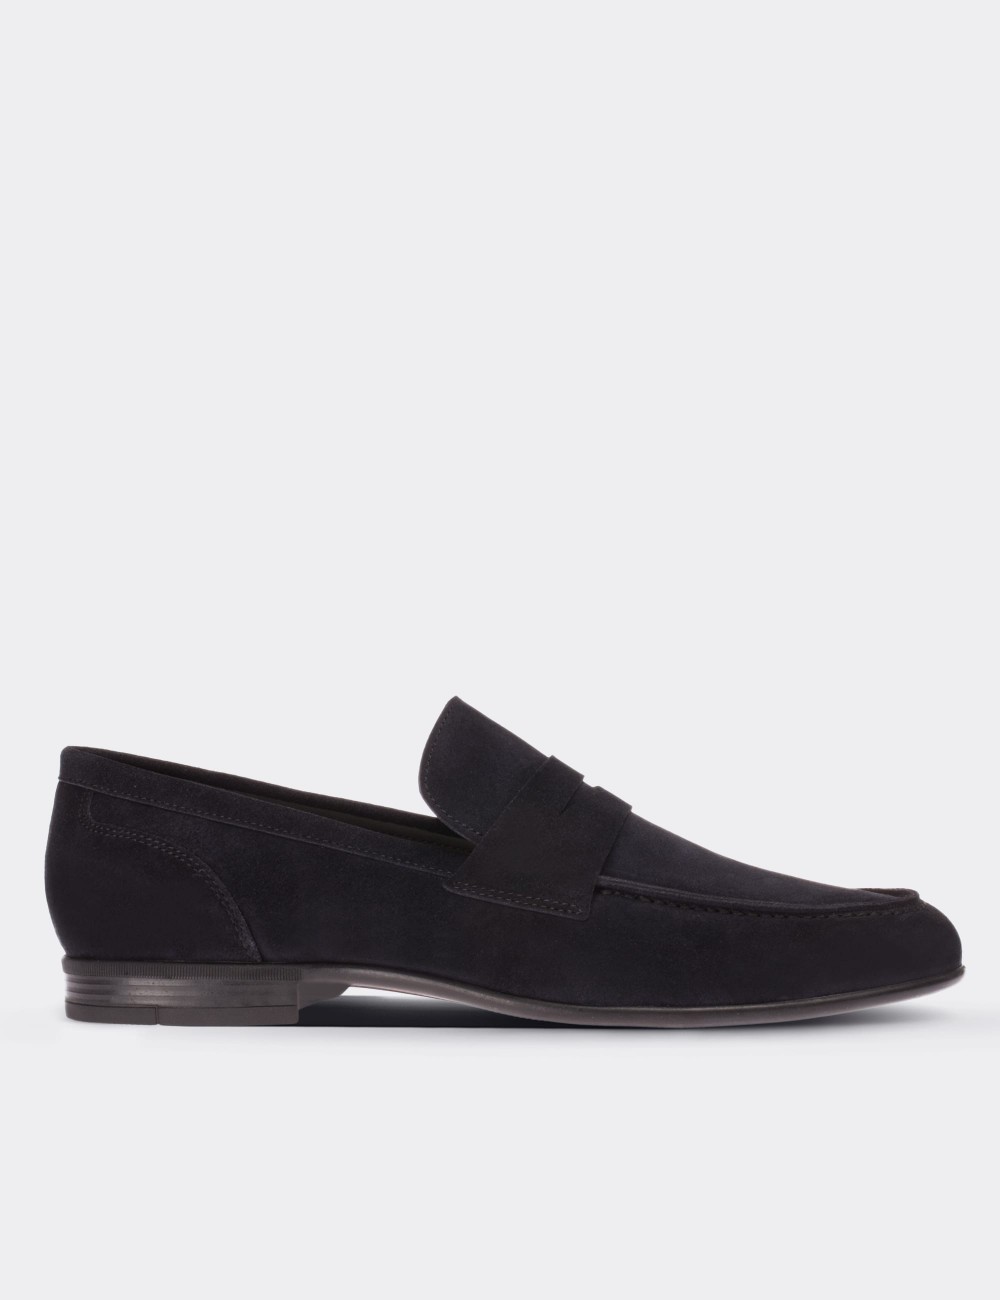 Navy Suede Leather Loafers - 01714MLCVC01